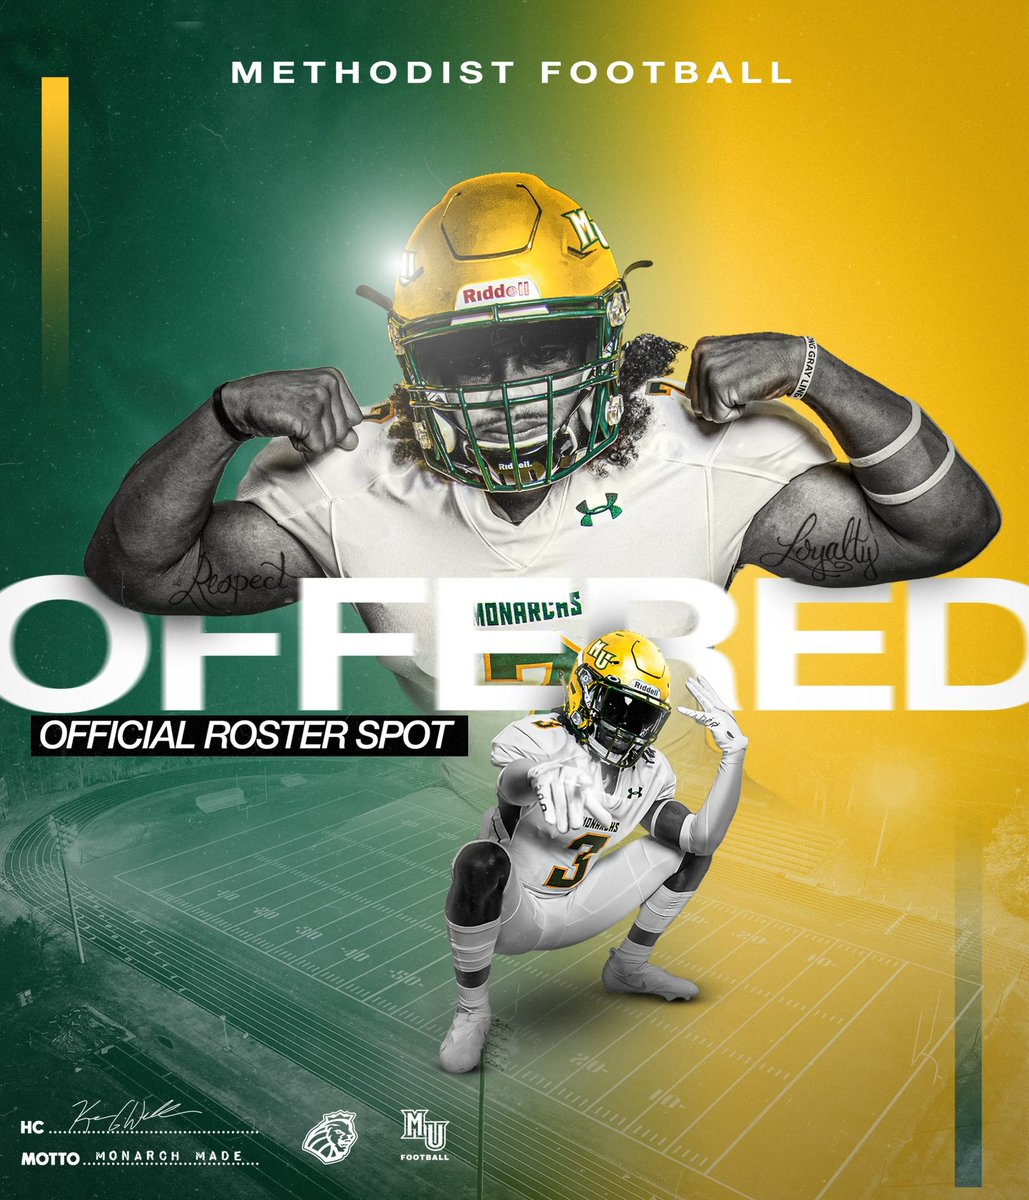 Super Grateful to receive an offical offer spot from @Methodist_FB, thank you to everyone at methodist and especially to @_Coach_Rad.